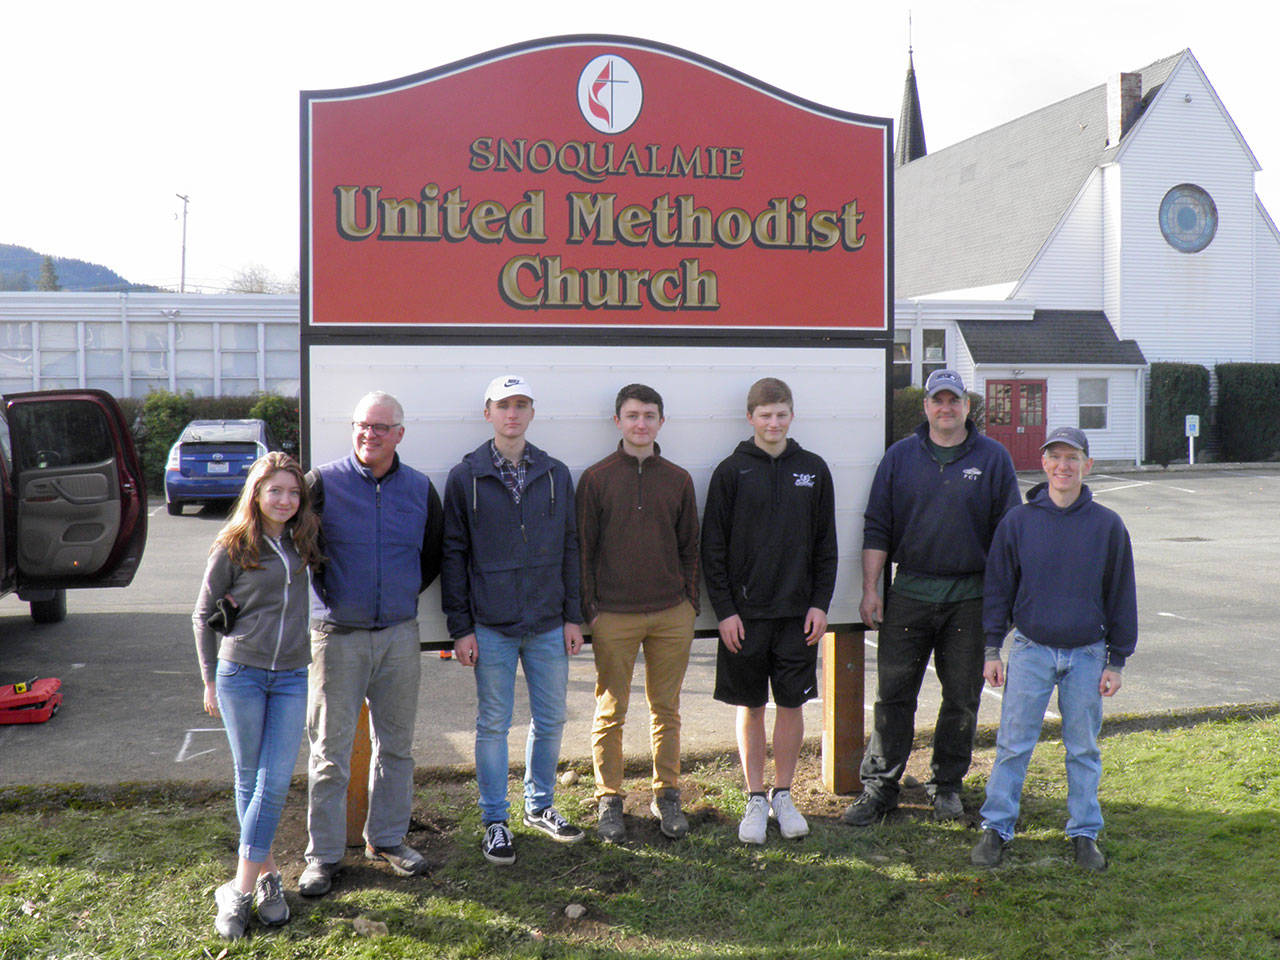 After 40 years, a new sign has been installed as part of an Eagle Scout project by Will Huestis. From left: Tess Huestis, Steve Huestis, Nick Steinrich, Will Huestis, Dawson Thomas, Mike Bateman, Wyatt Richeter. (Courtesy Photo)